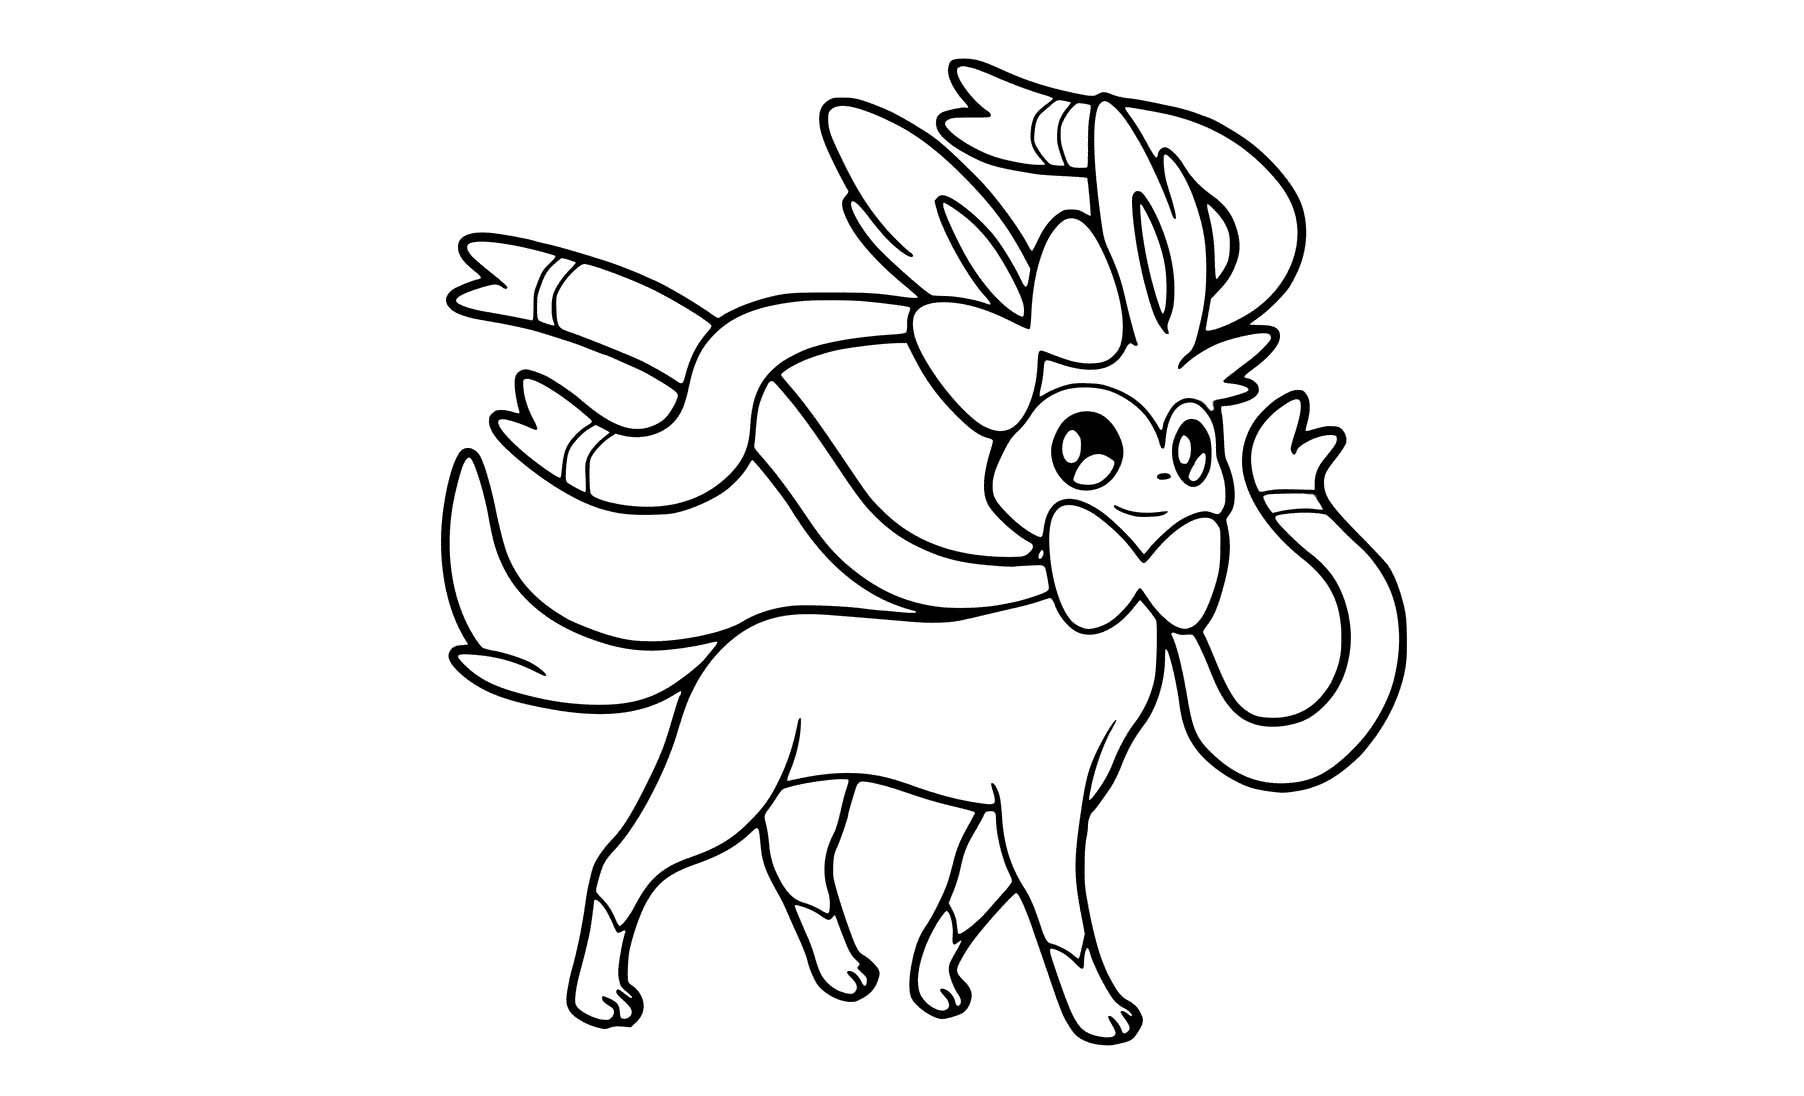 Cute sylveon coloring pages pdf free